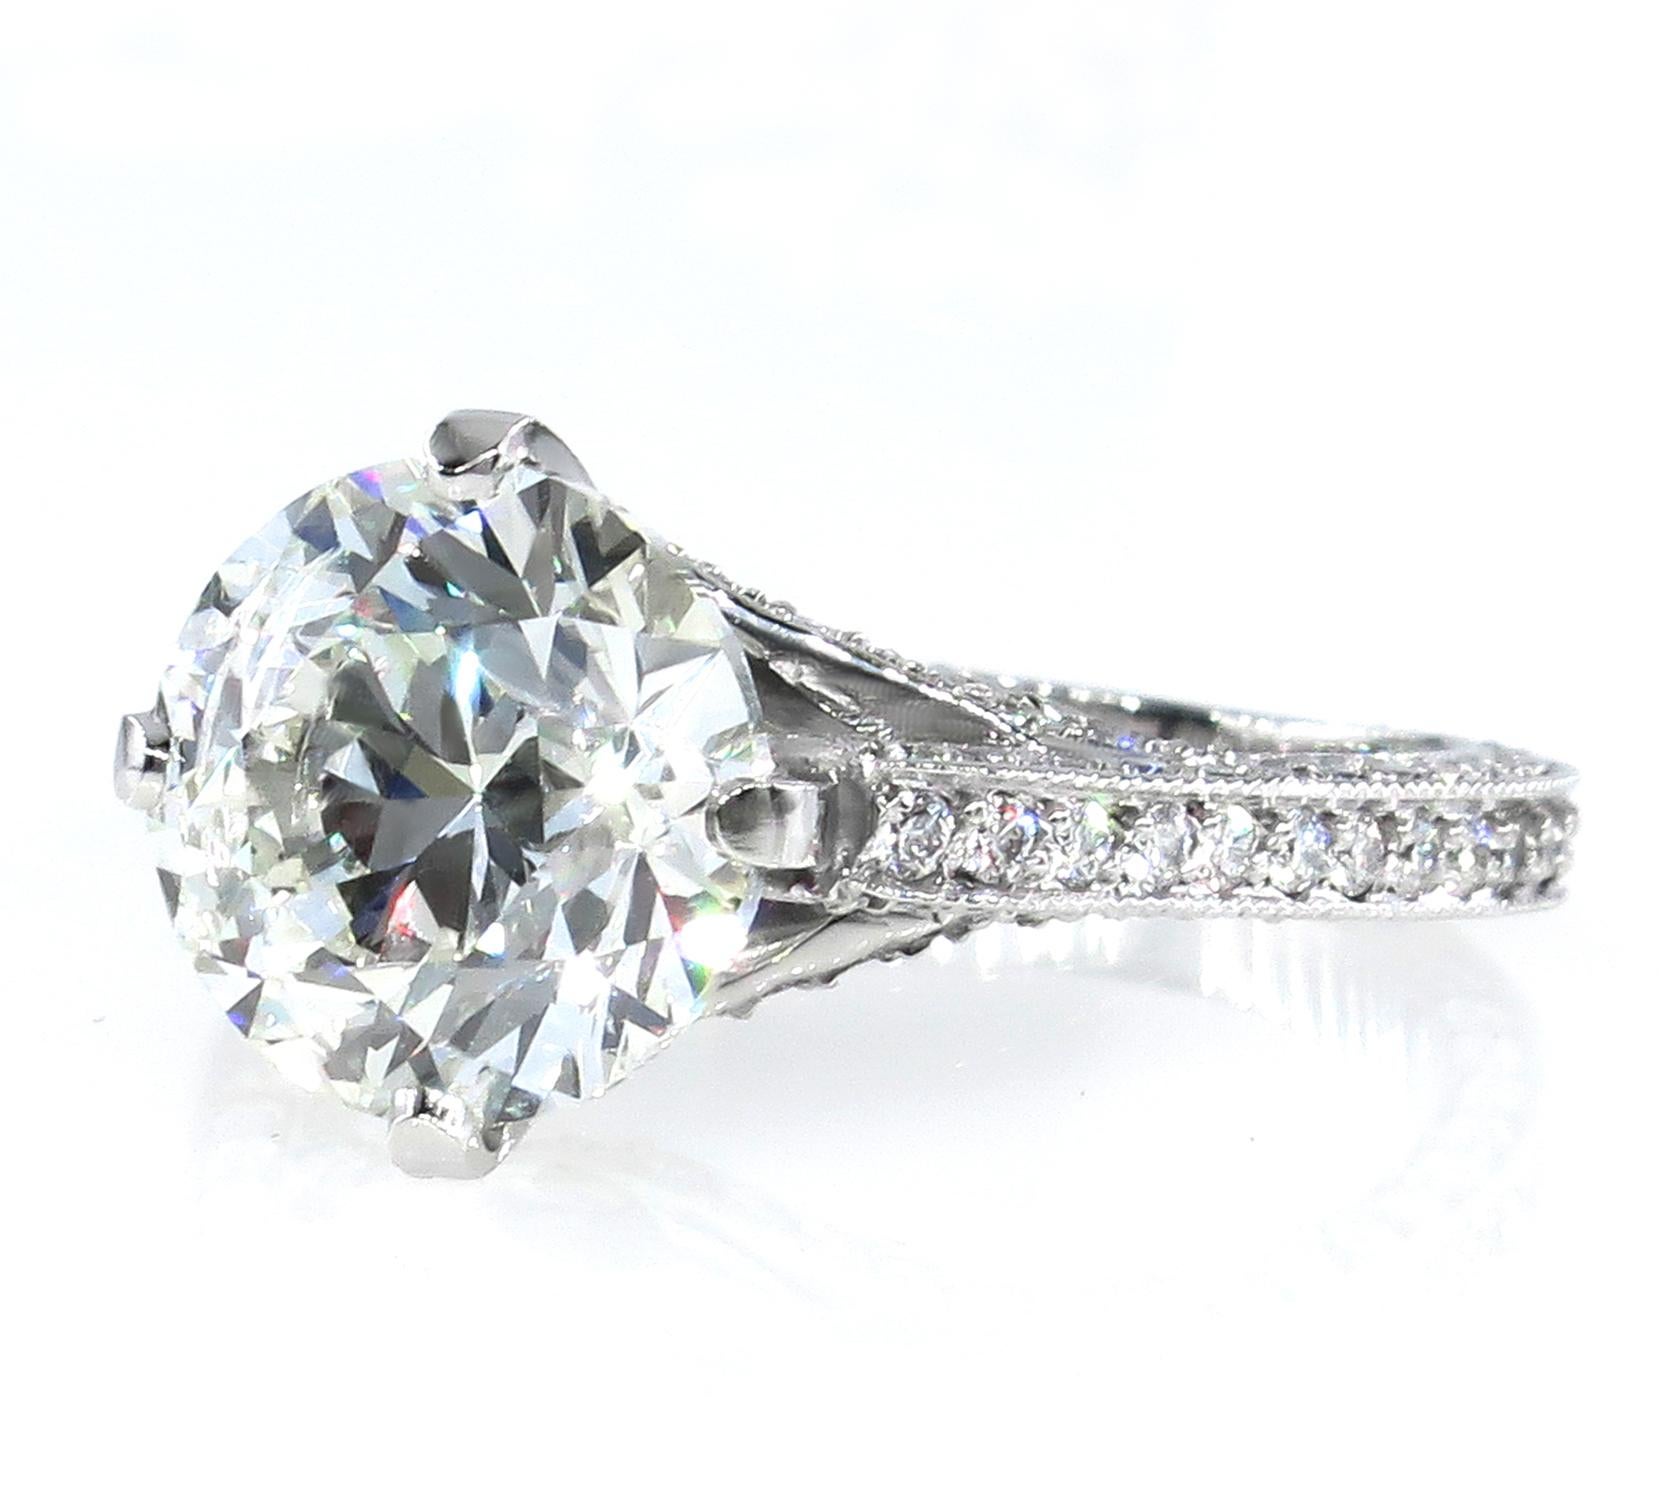 This is ring is just breathtaking and SUPER Fine and truly show stopper!
The center of attention in this dazzler is the Exquisite, Very Bright Round Brilliant cut 3.02ct Diamond in H color , SI3 clarity,accompanied by EGL USA certificate. SUPER